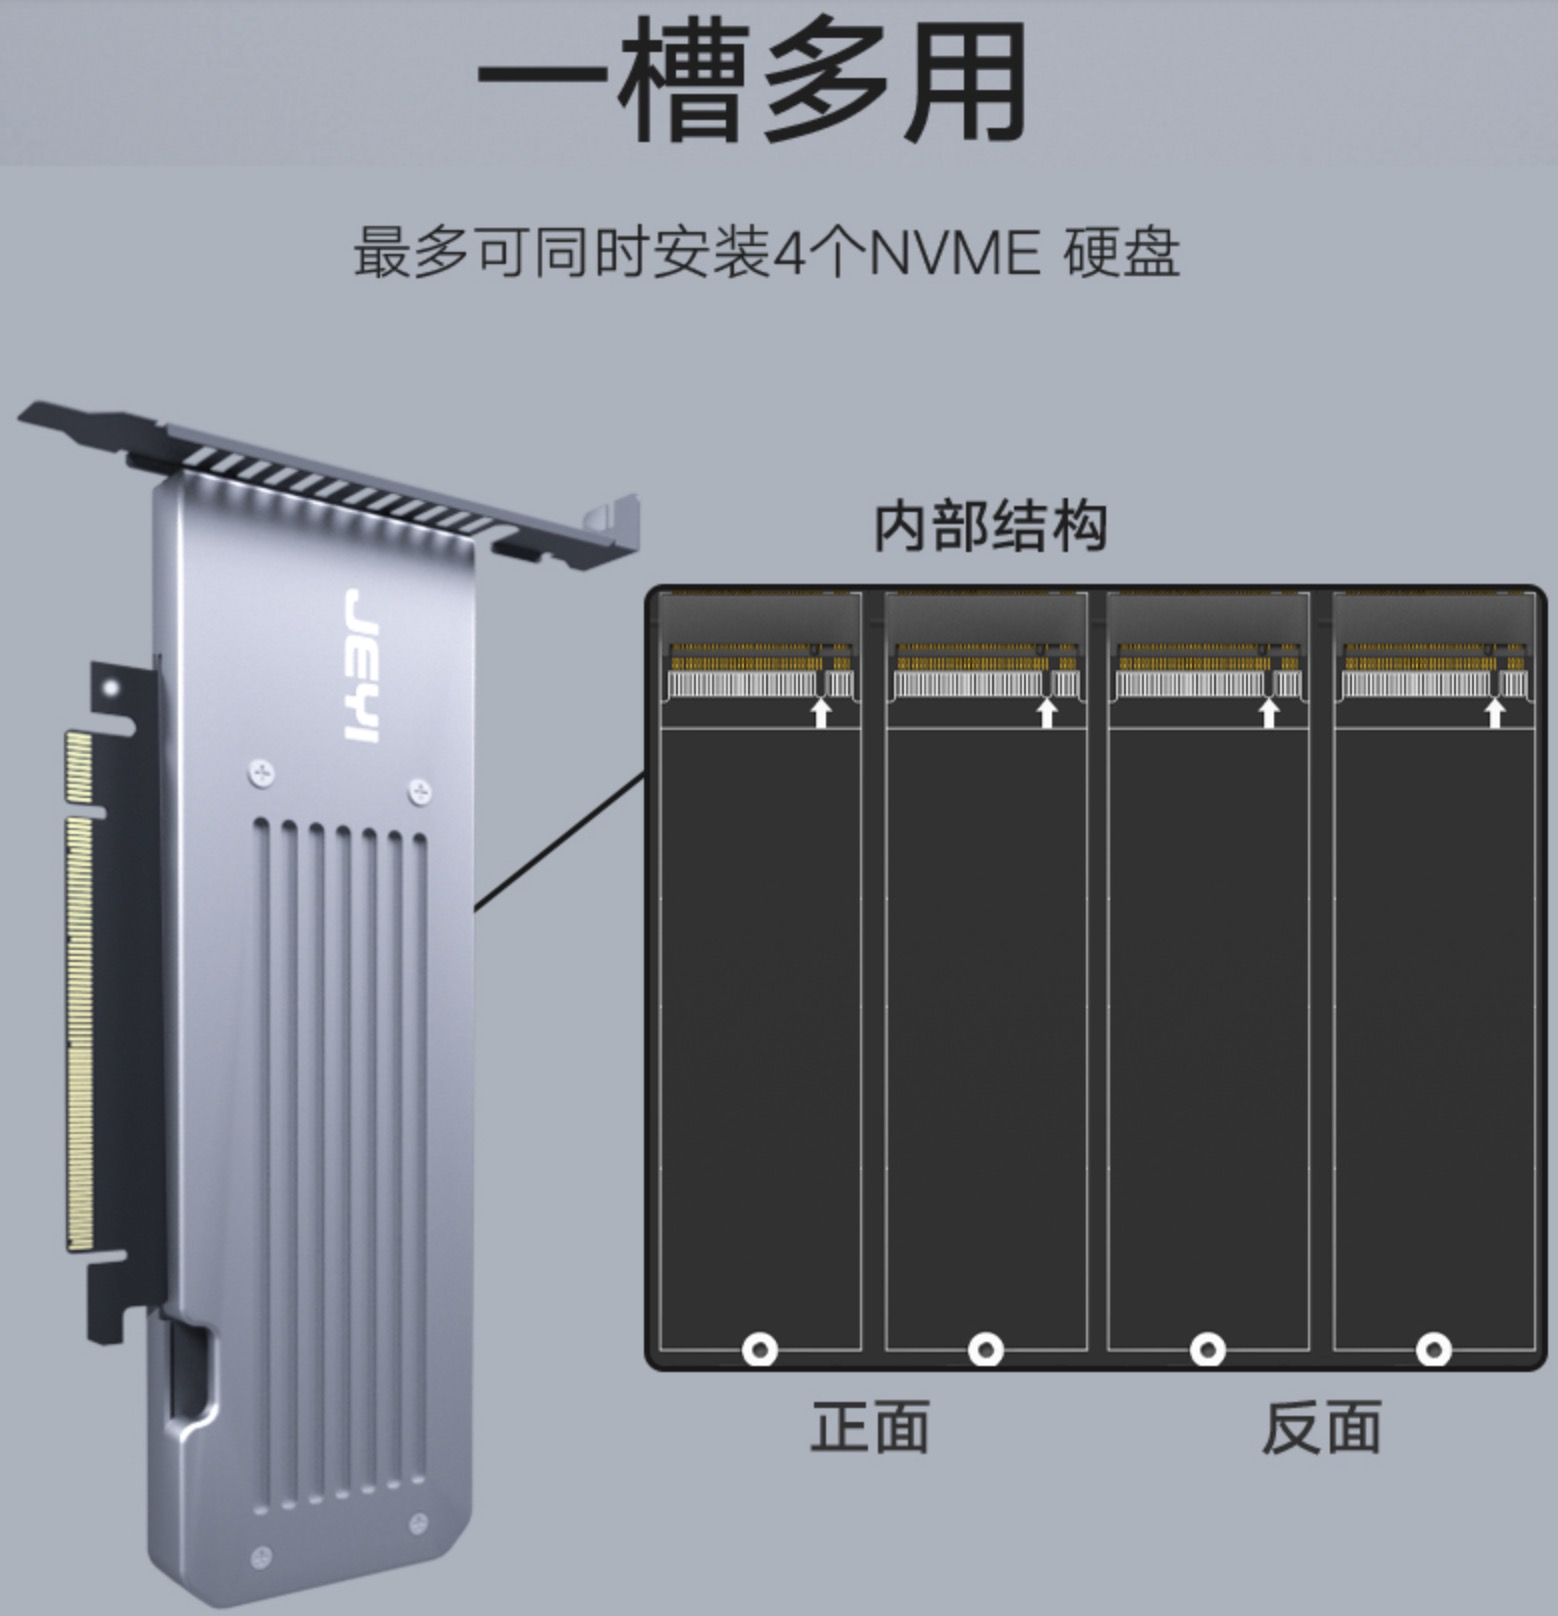 ../../../../_images/pcie_nvme_extendcard-2.png